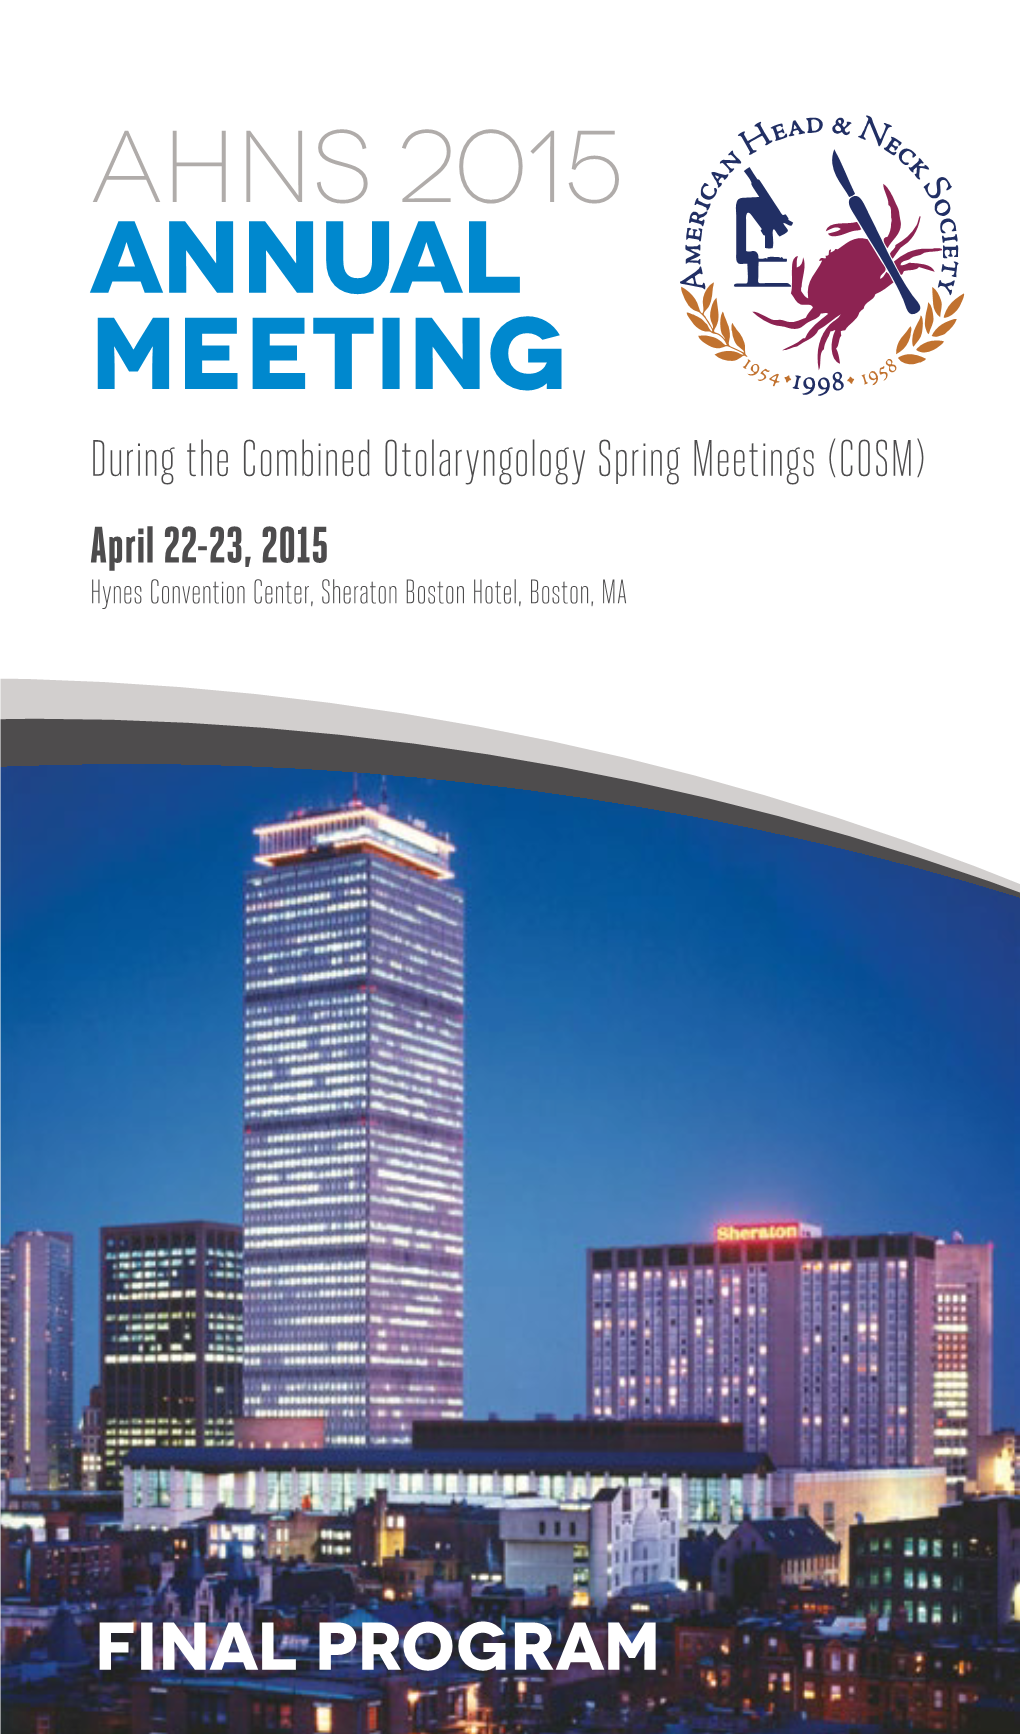 AHNS 2015 Annual Meeting During the Combined Otolaryngology Spring Meetings (COSM) April 22-23, 2015 Hynes Convention Center, Sheraton Boston Hotel, Boston, MA